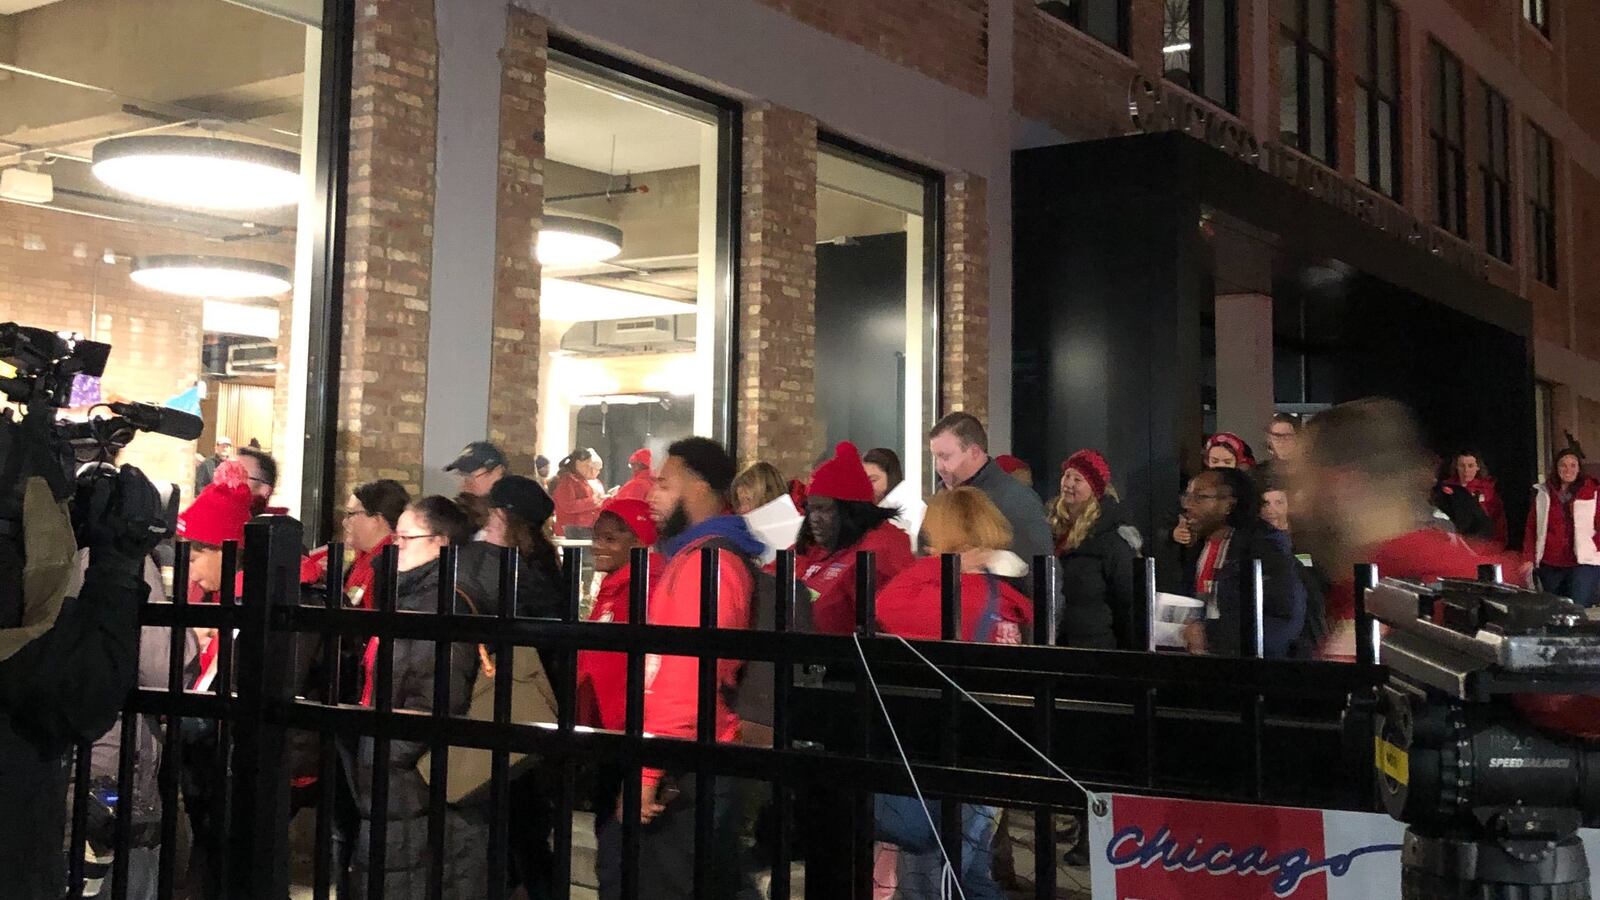 Chicago Teachers Union delegates leave a House of Delegates meeting on Oct. 29, 2019, the ninth day of the Chicago teachers strike.